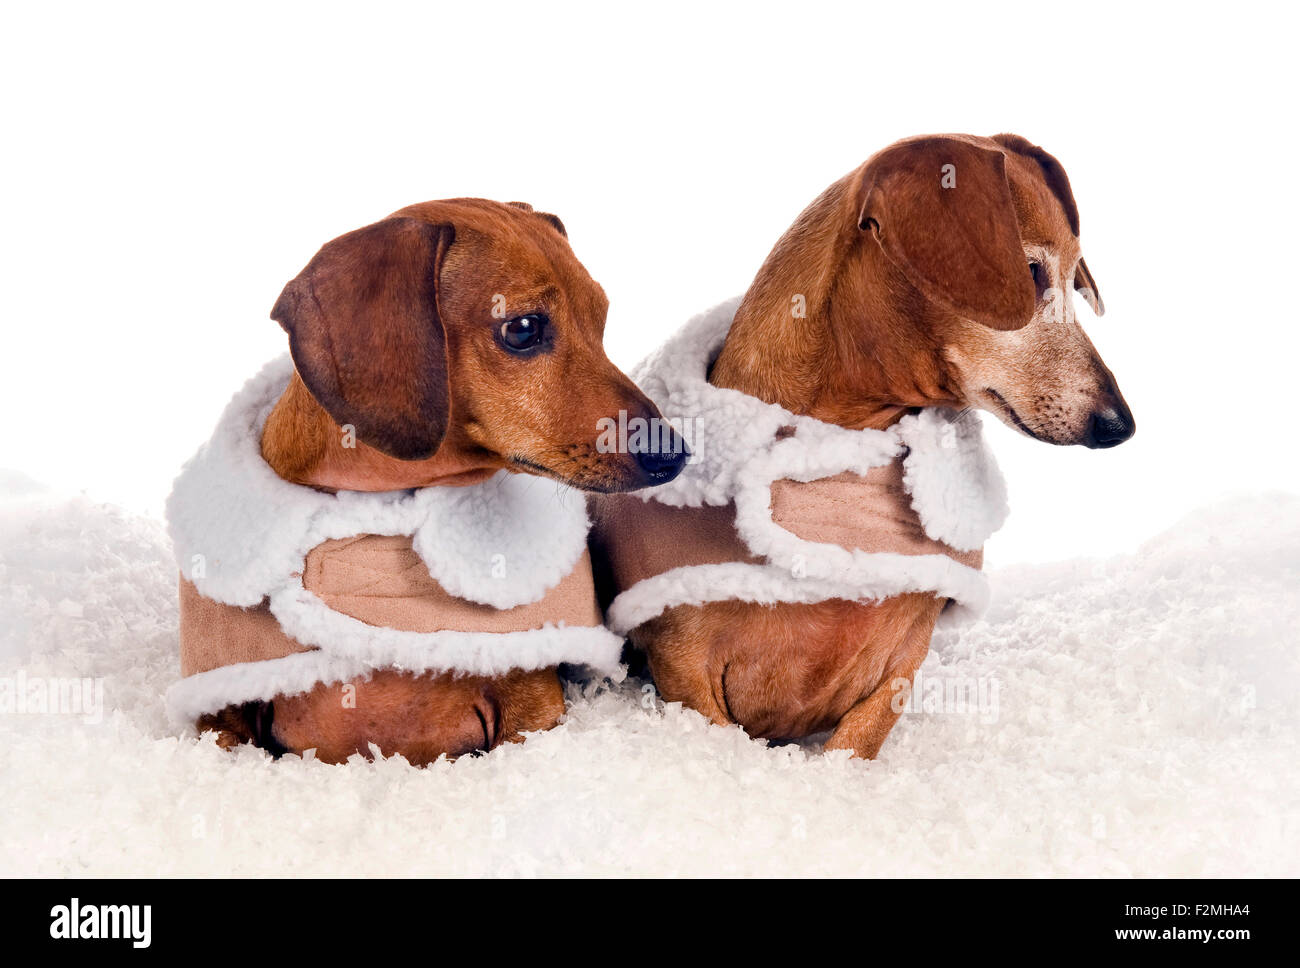 Cute Little Dogs Dressed In Winter Coats Looking Intrigued Stock Photo